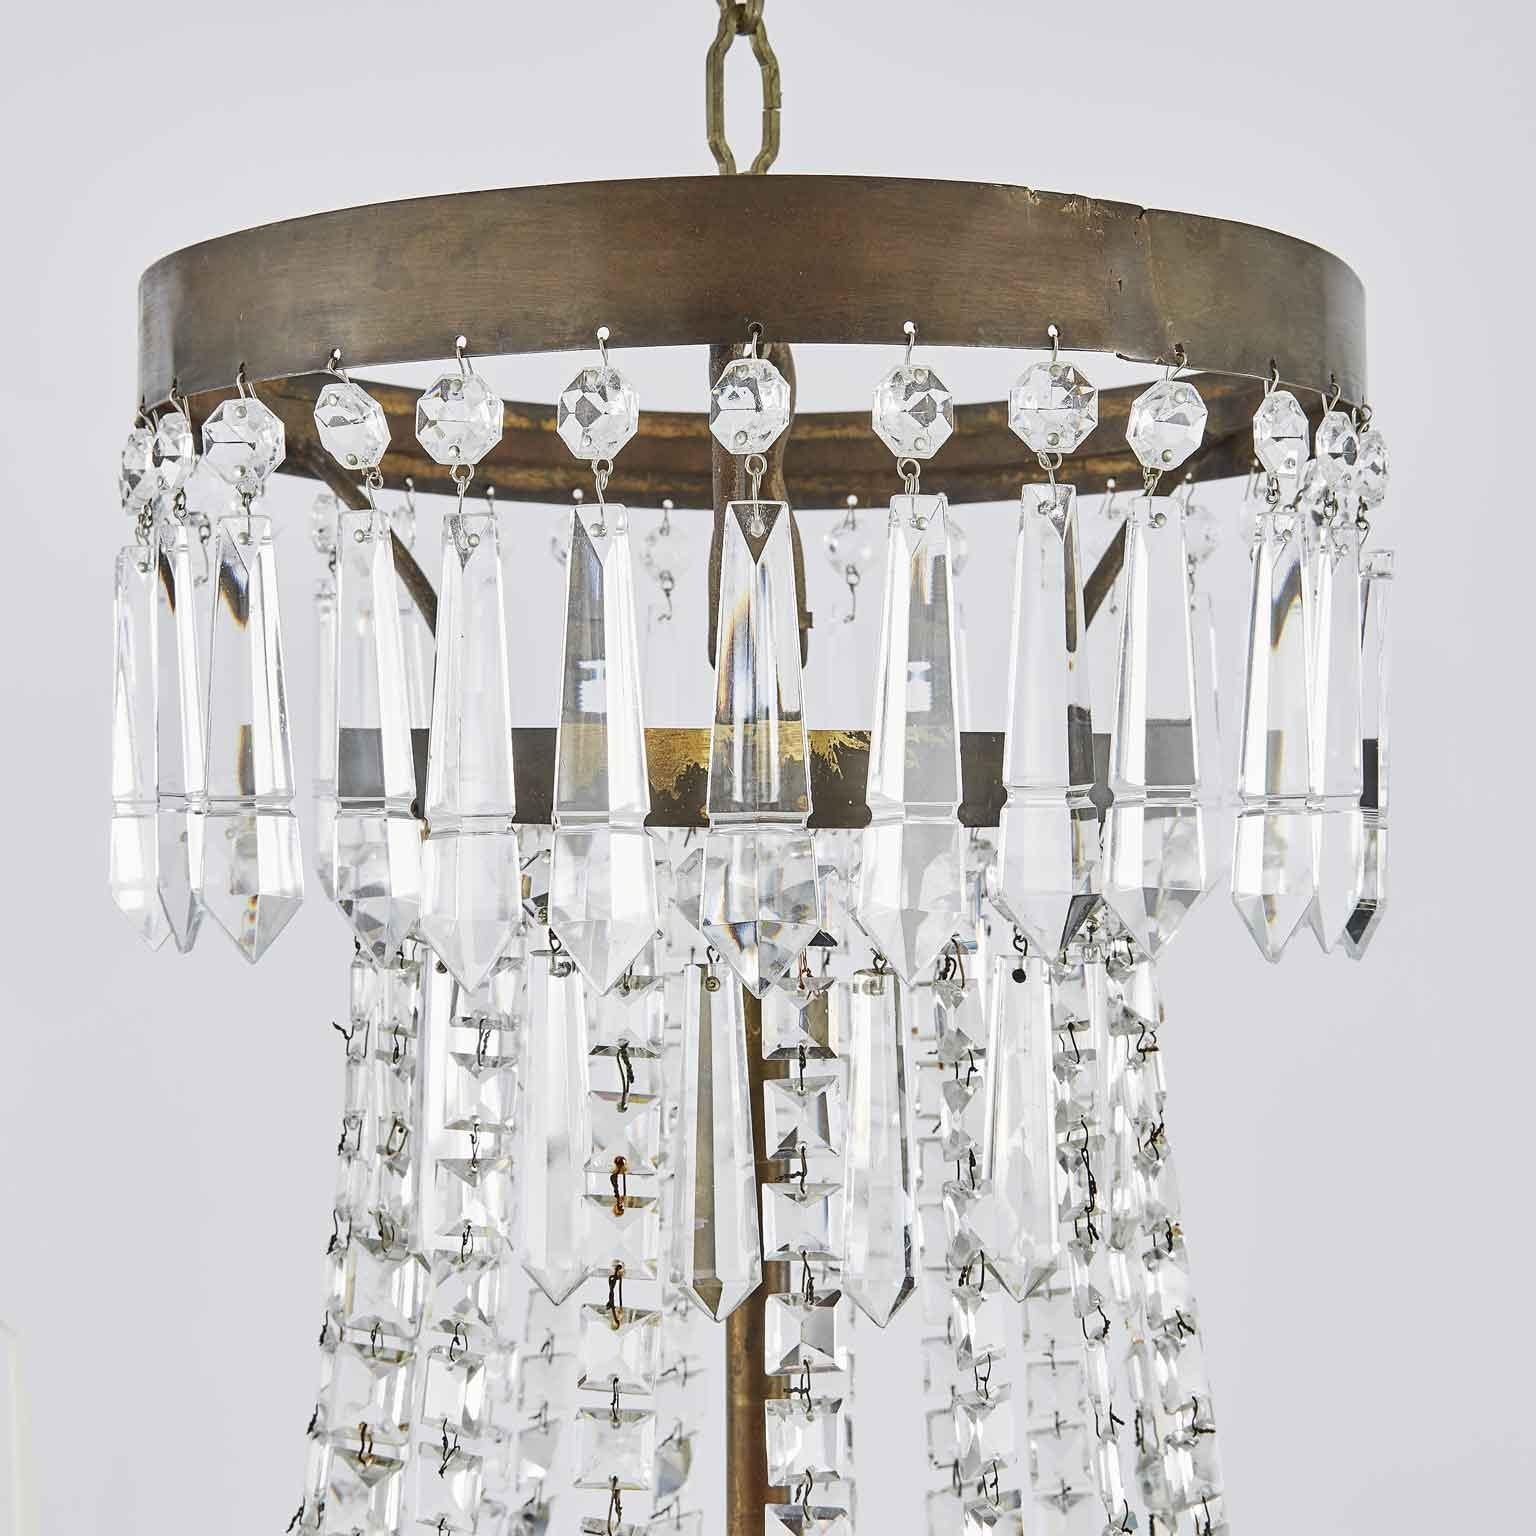 19th Century Italian Empire Crystal Candle Chandelier In Good Condition For Sale In Milan, IT